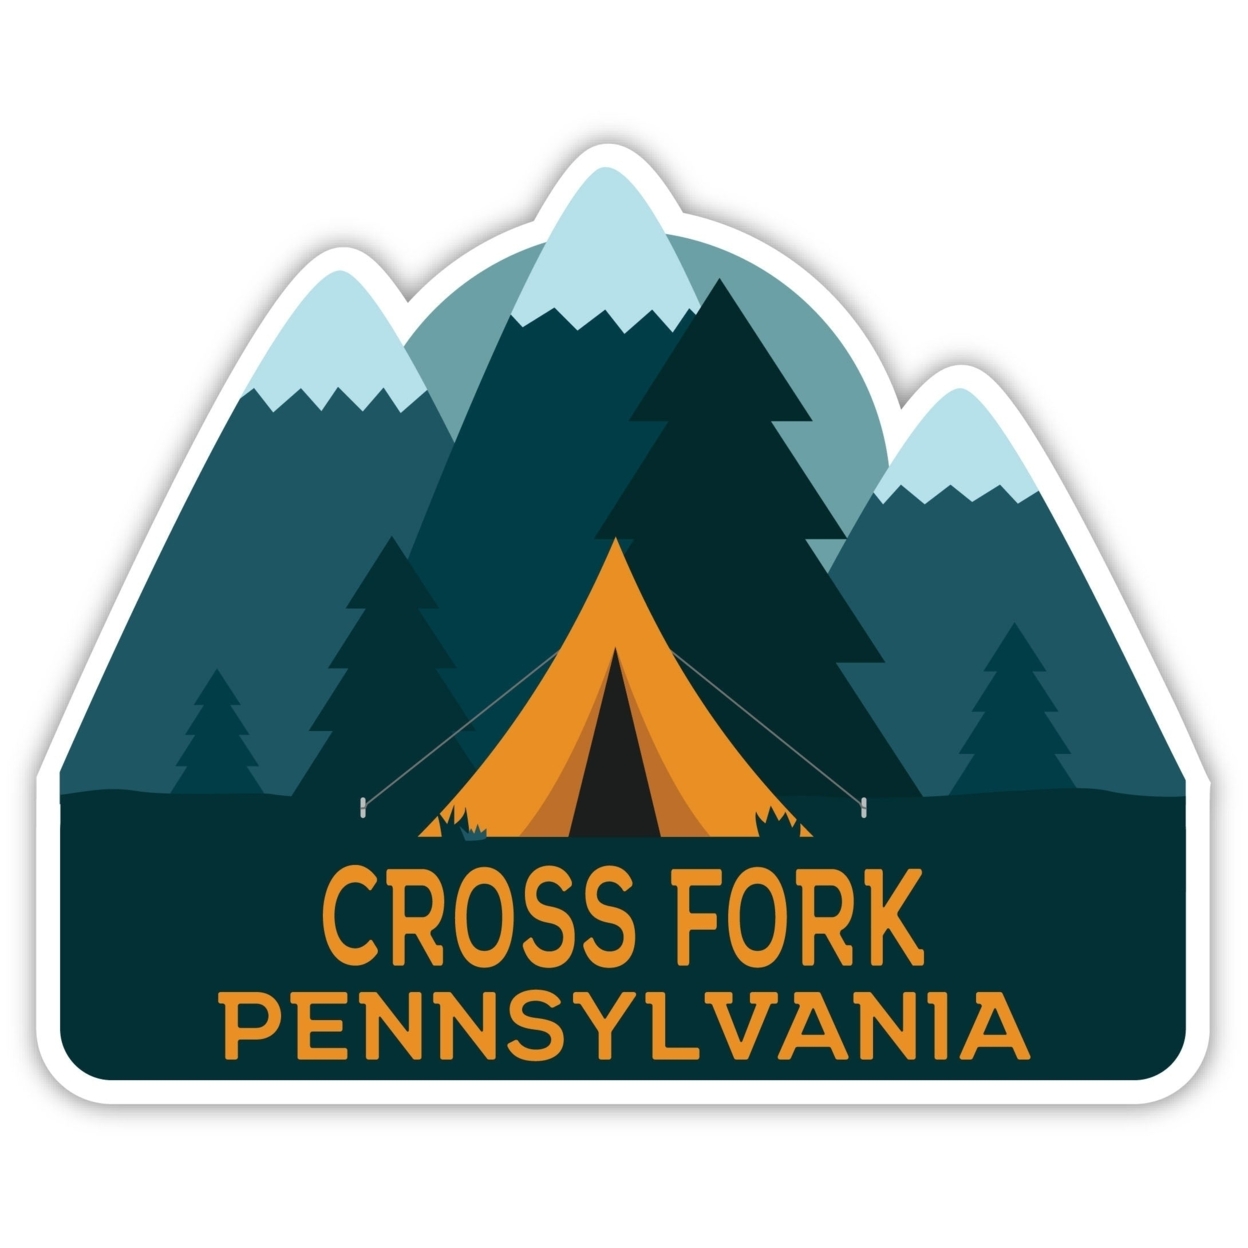 Cross Fork Pennsylvania Souvenir Decorative Stickers (Choose Theme And Size) - 4-Pack, 4-Inch, Tent